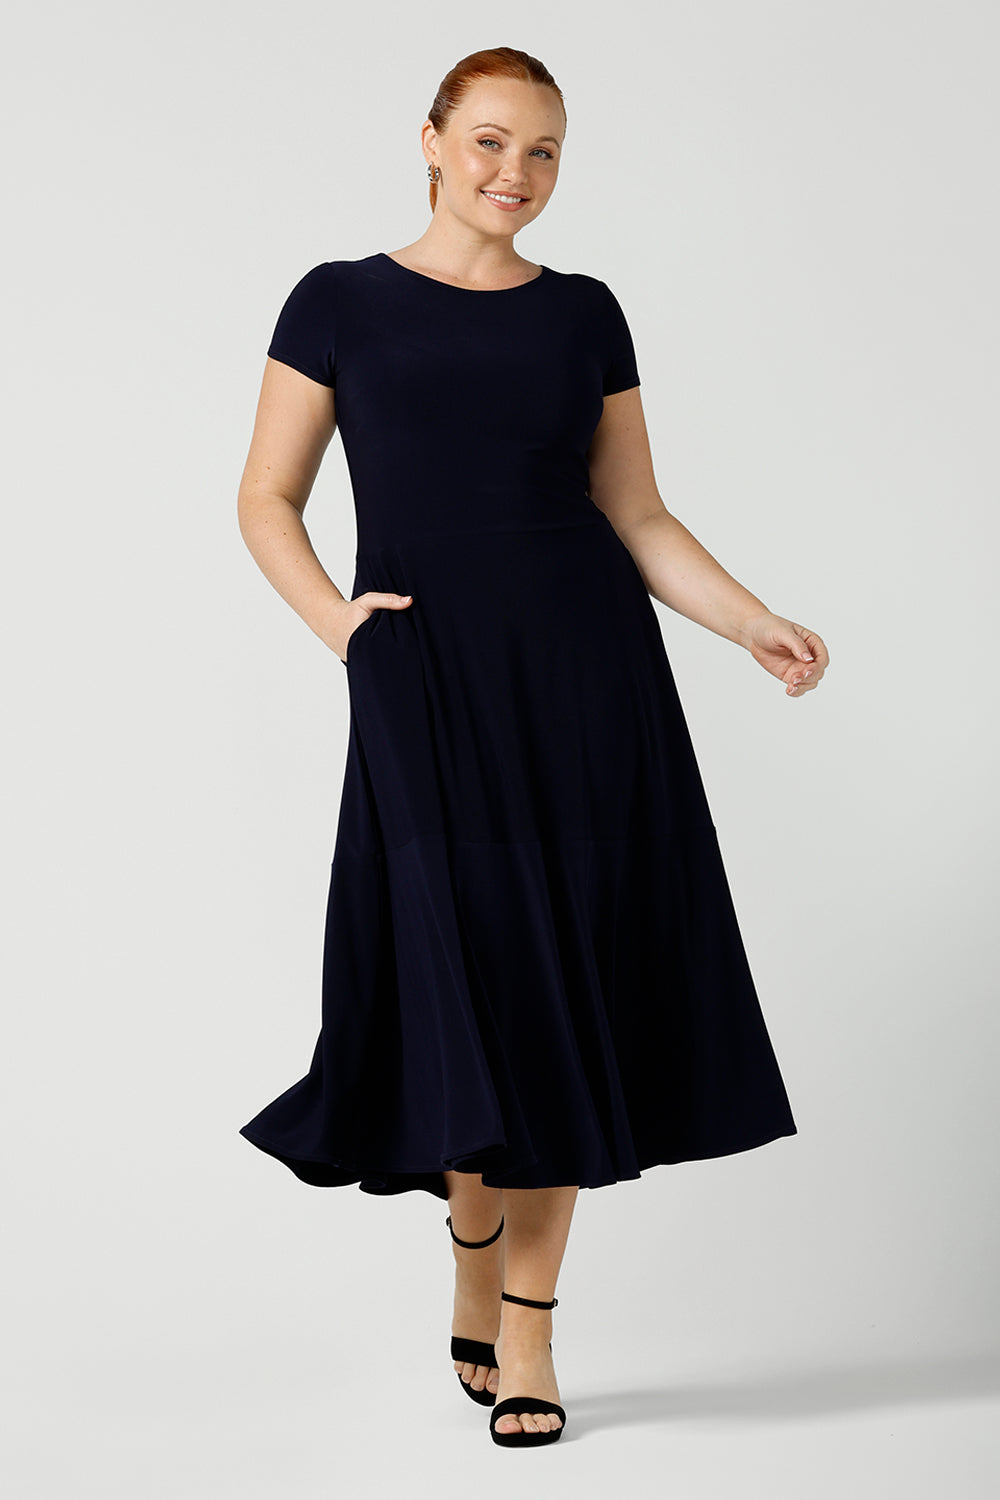 If you're looking for dresses made in Australia, look to this elegant navy dress. This high neck, short sleeve dress with flared skirt and ruffle hemline is a good workwear dress as well as a classic cocktail dress. With a midi-length skirt, shop this dress in plus sizes as well as petite thanks to Australian made, ethical ladies clothing brand, Leina & Fleur.